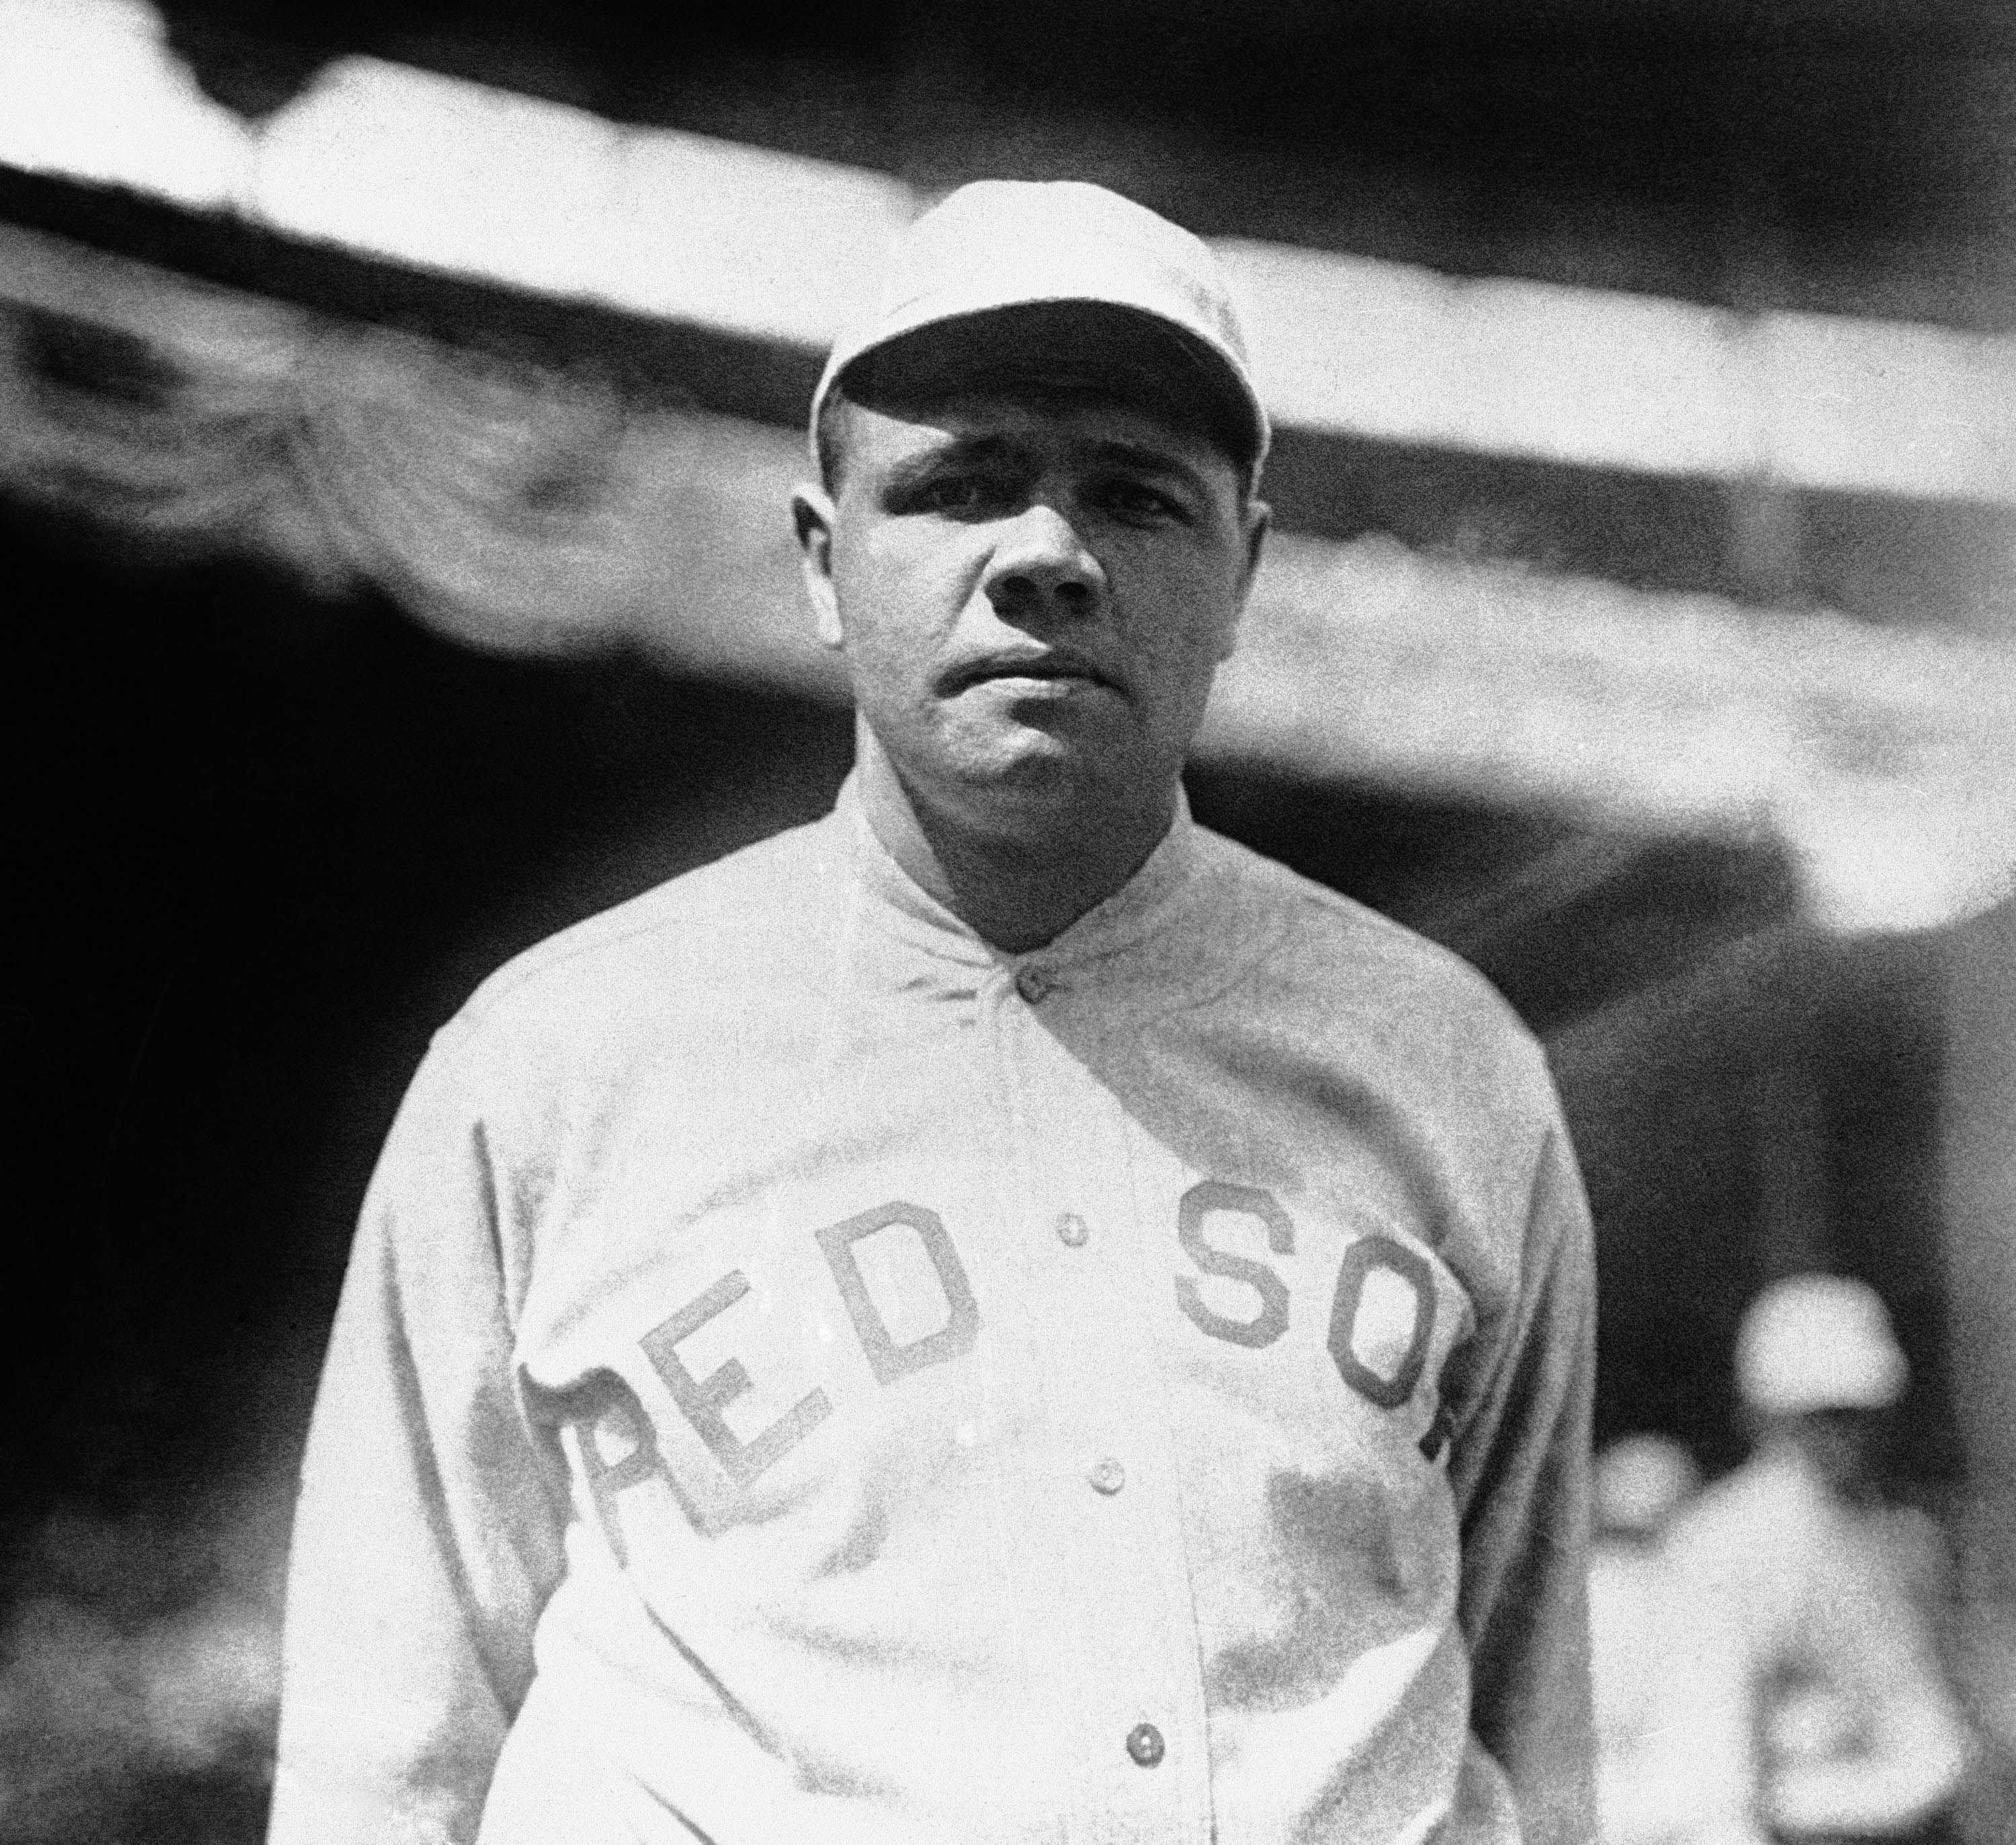 New Life of Babe Ruth Has Help From the Past - The New York Times